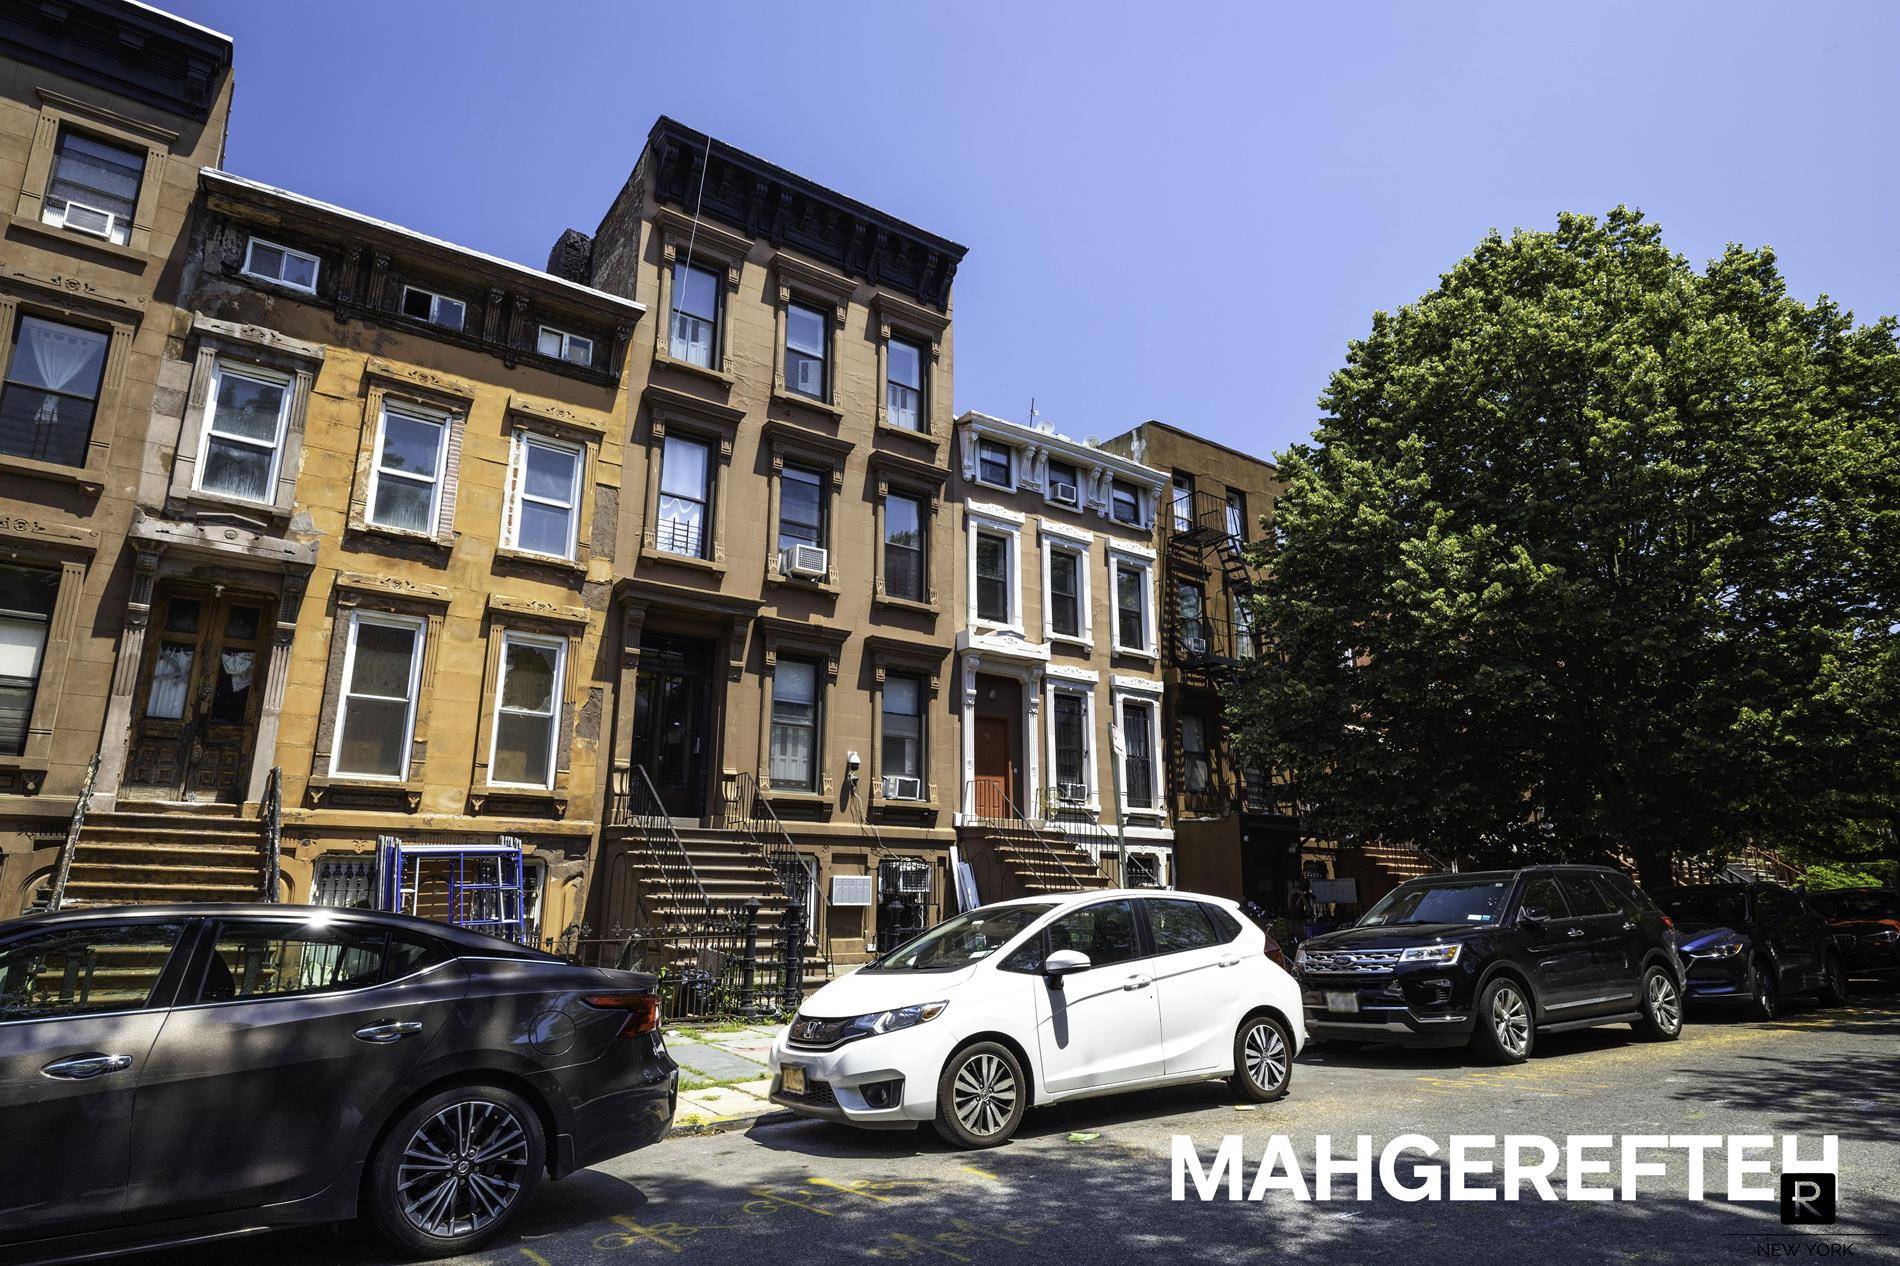 MOTIVATED SELLER amp ; PRICED TO SELLThis is one of the biggest townhouses on the block, an exceptional newly renovated 4 story, 22 foot wide, 4 family brownstone in the ...